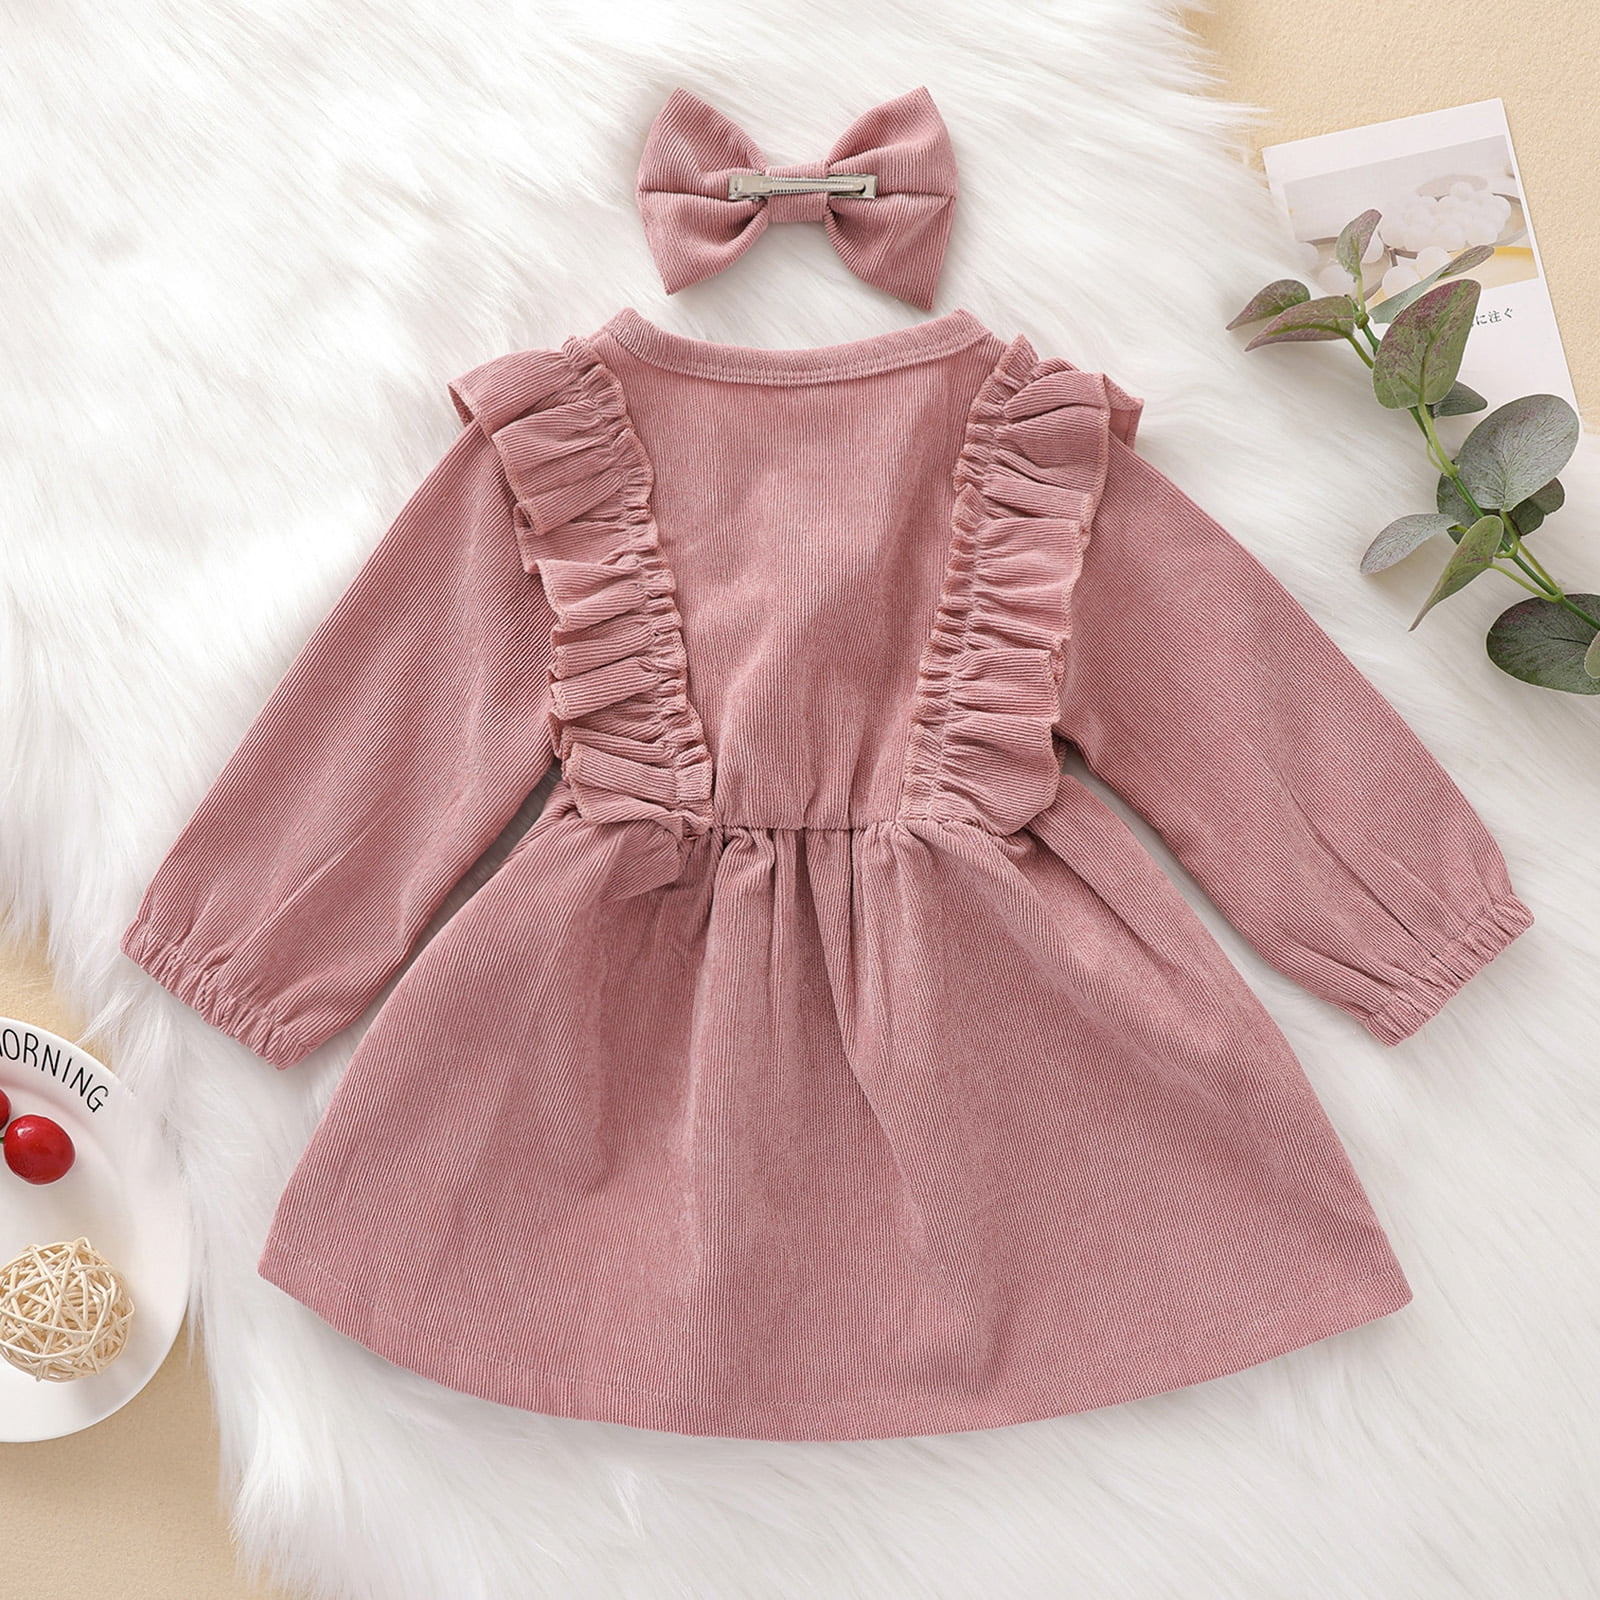 Baby Pinafore Dress in Boombox - Worthy Threads